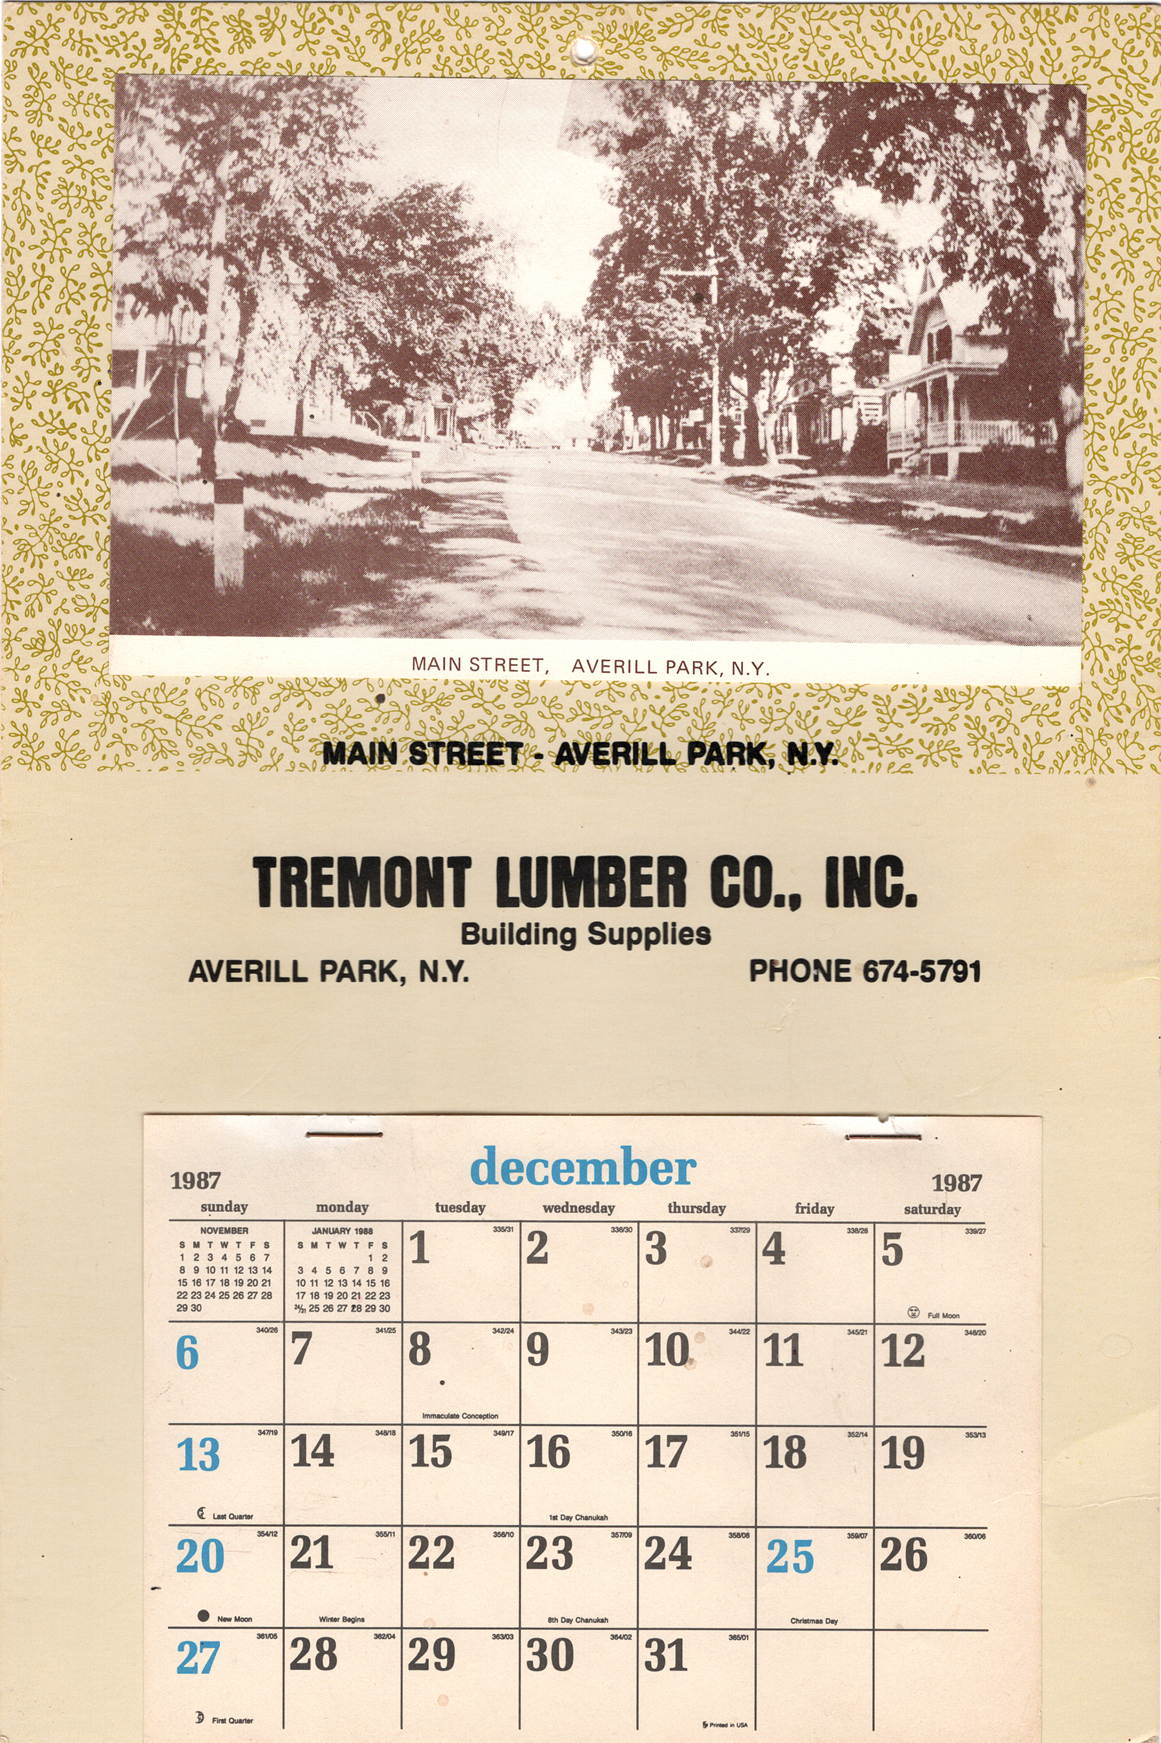 Tremont Lumber Company calendar from 1987.